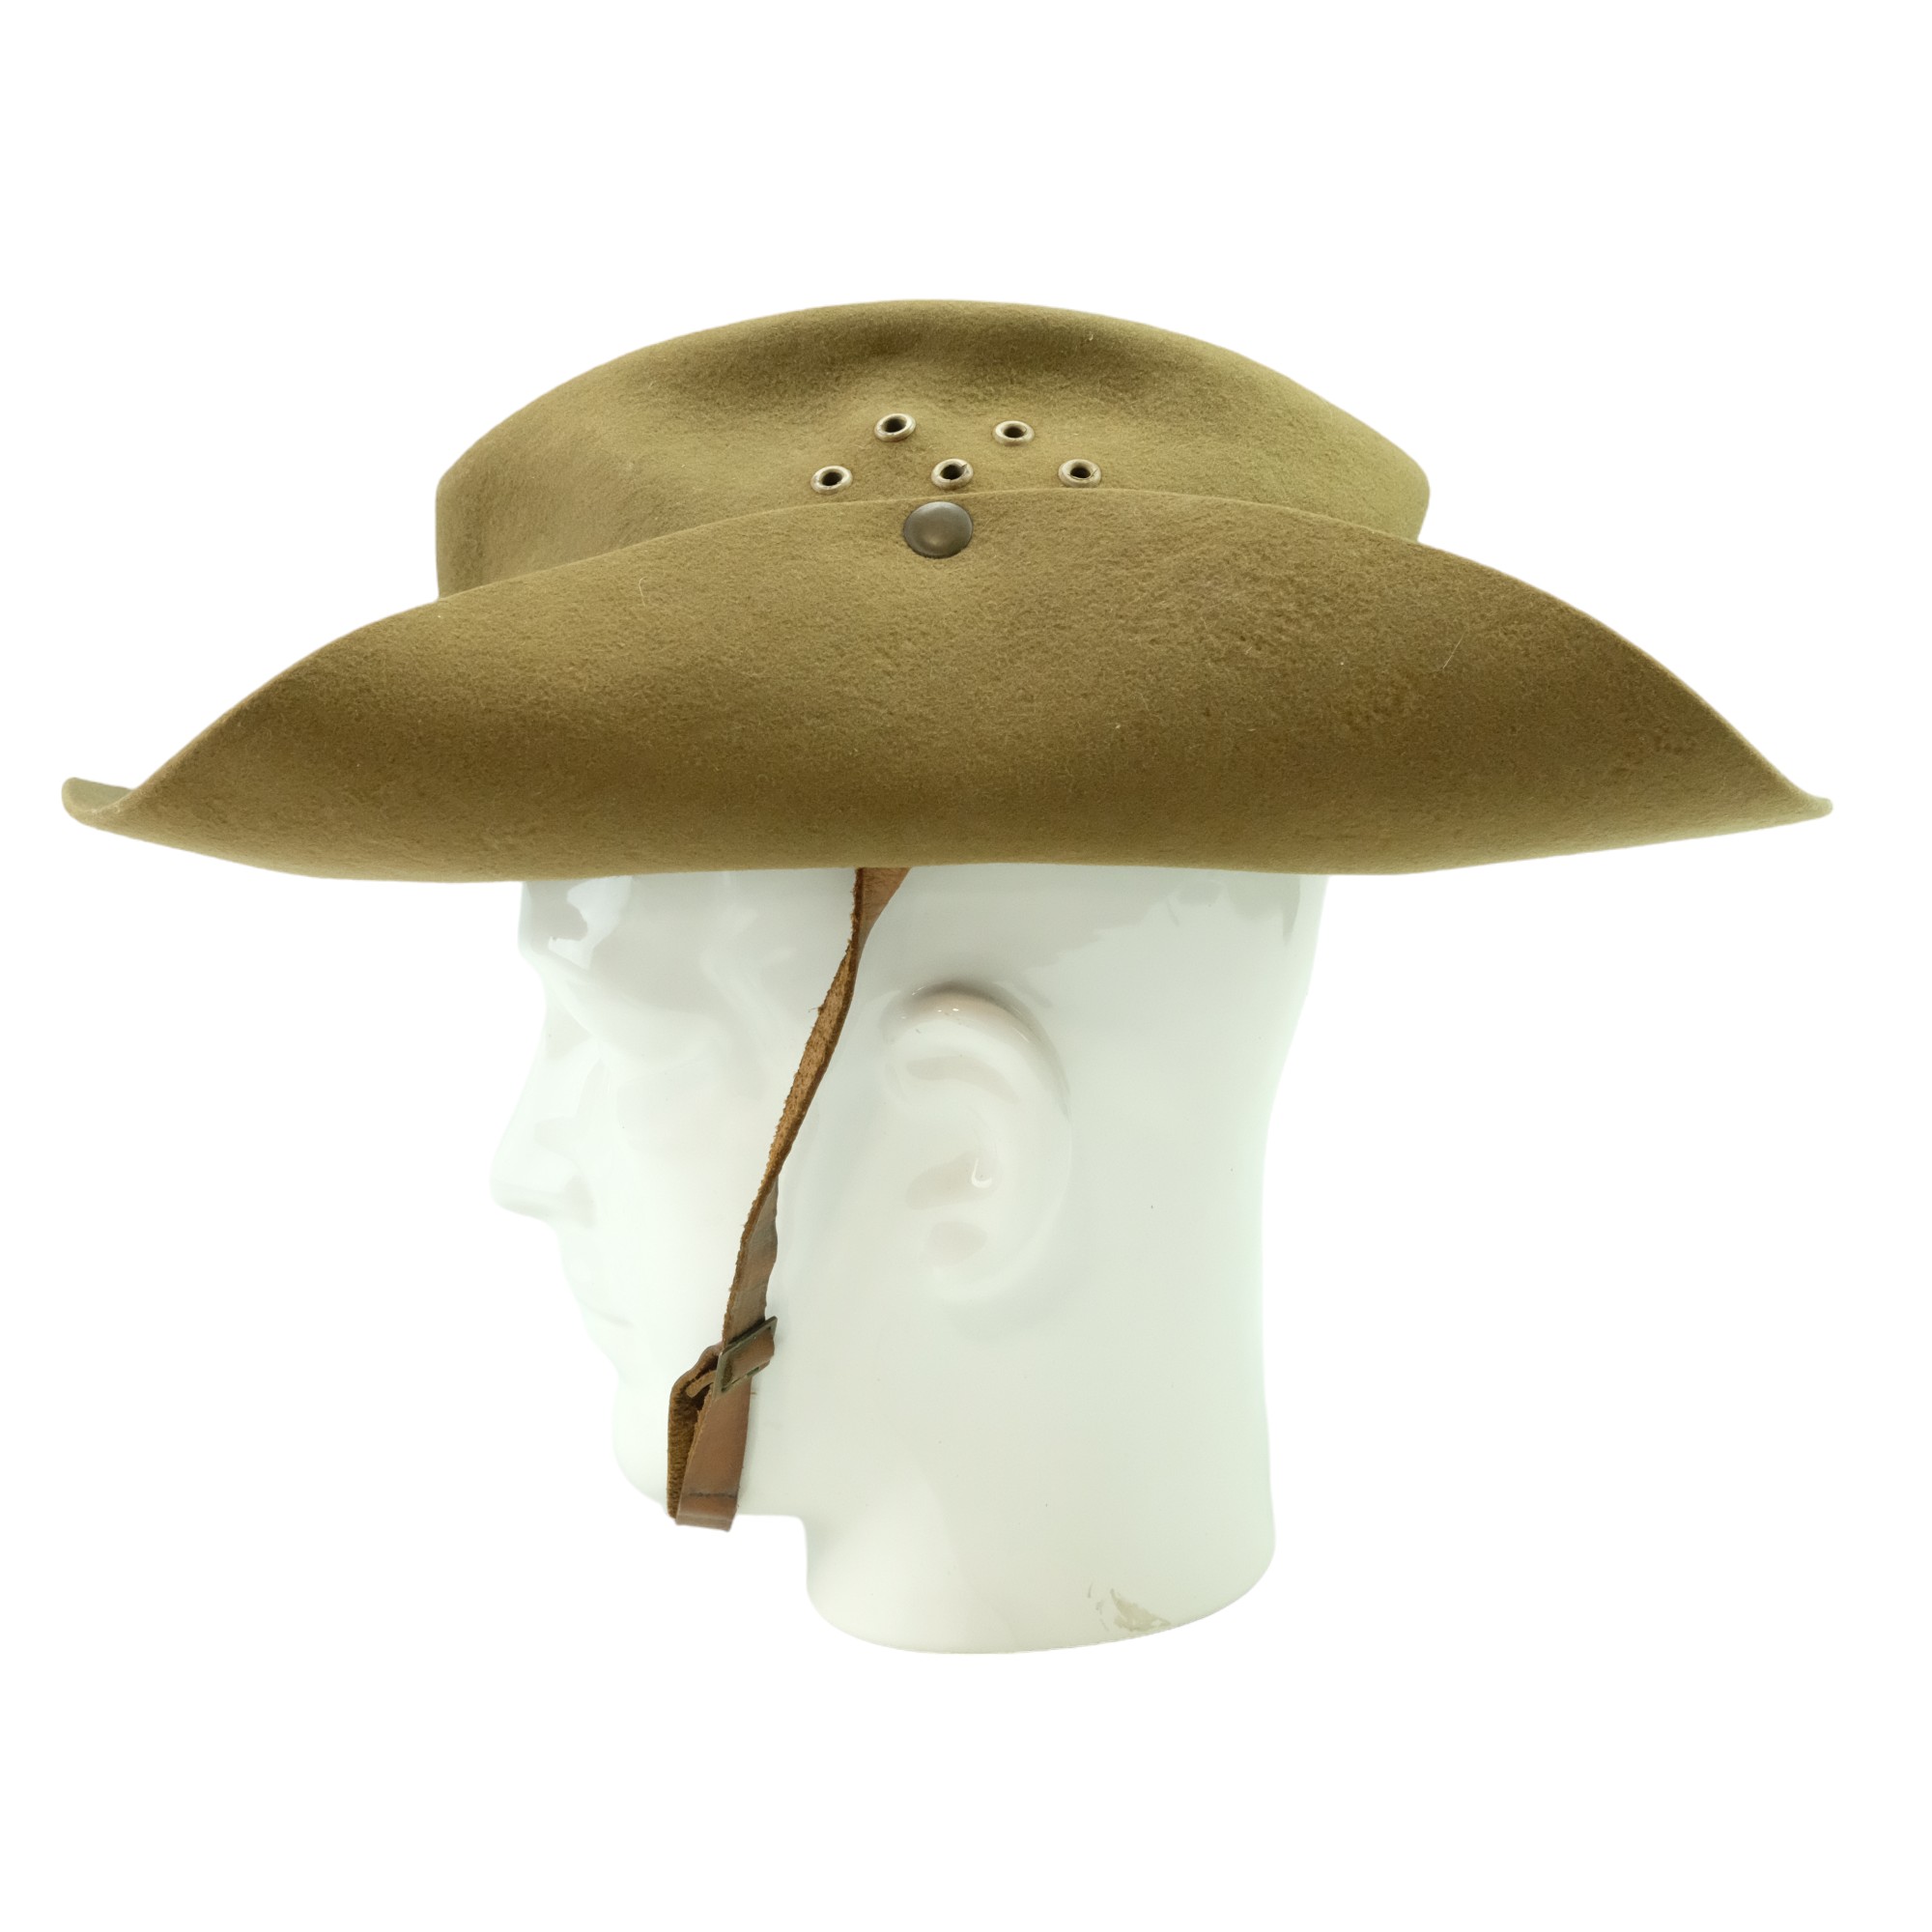 A 1945 Royal Army Medical Corps officer's bush hat, bearing the inscribed name Lieut Frith and an - Image 3 of 7